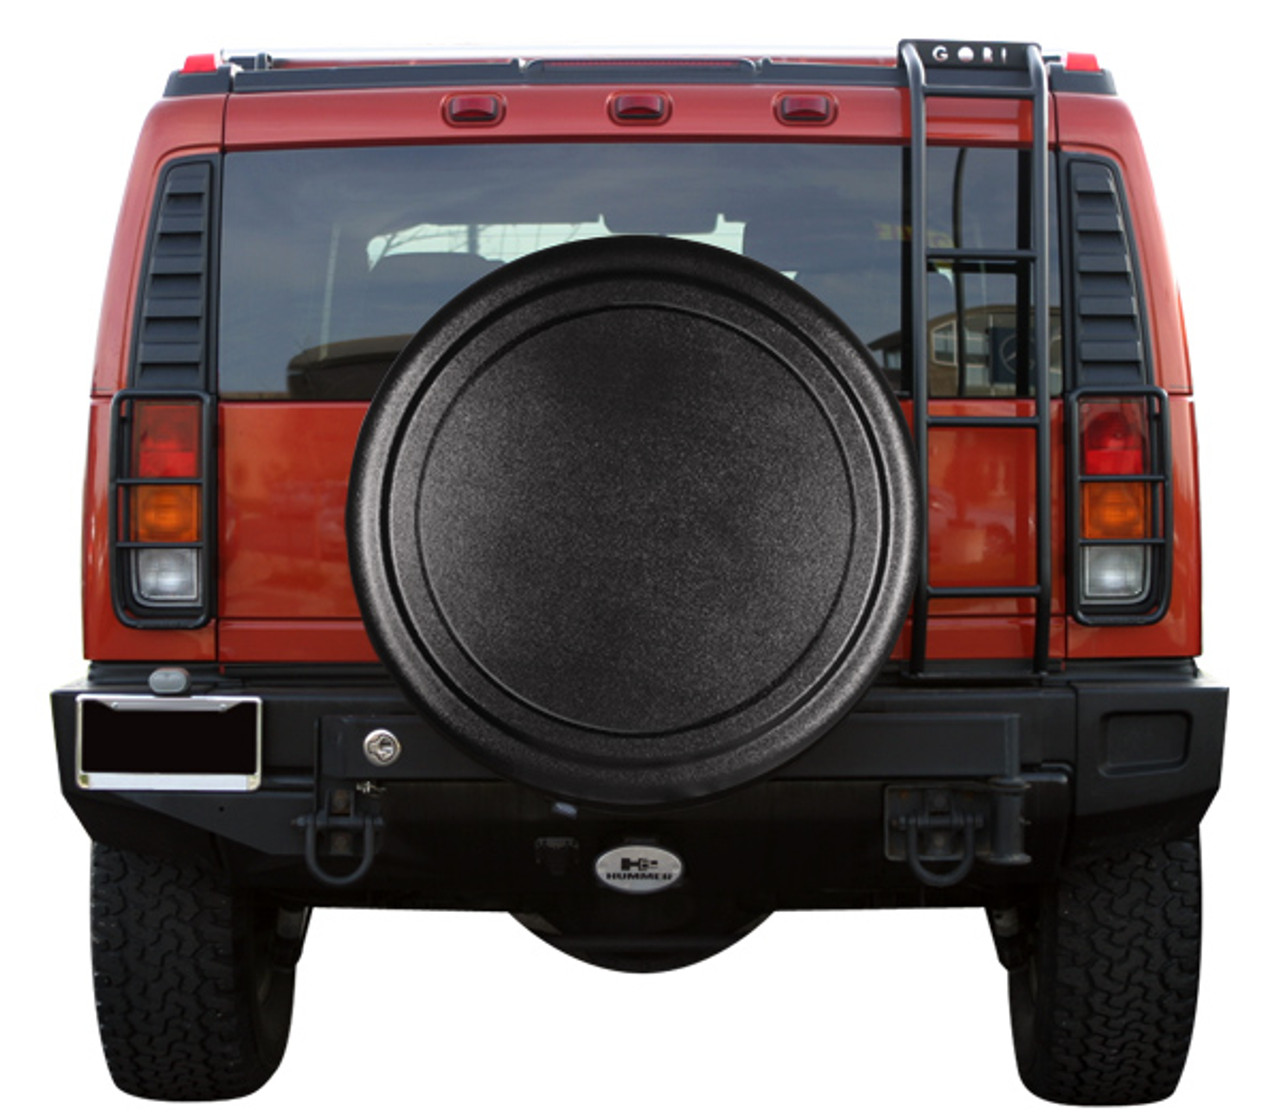 2002-2004 Hummer H2 Rigid Tire Cover by Boomerang Official GM Licensed Hummer  Tire Covers